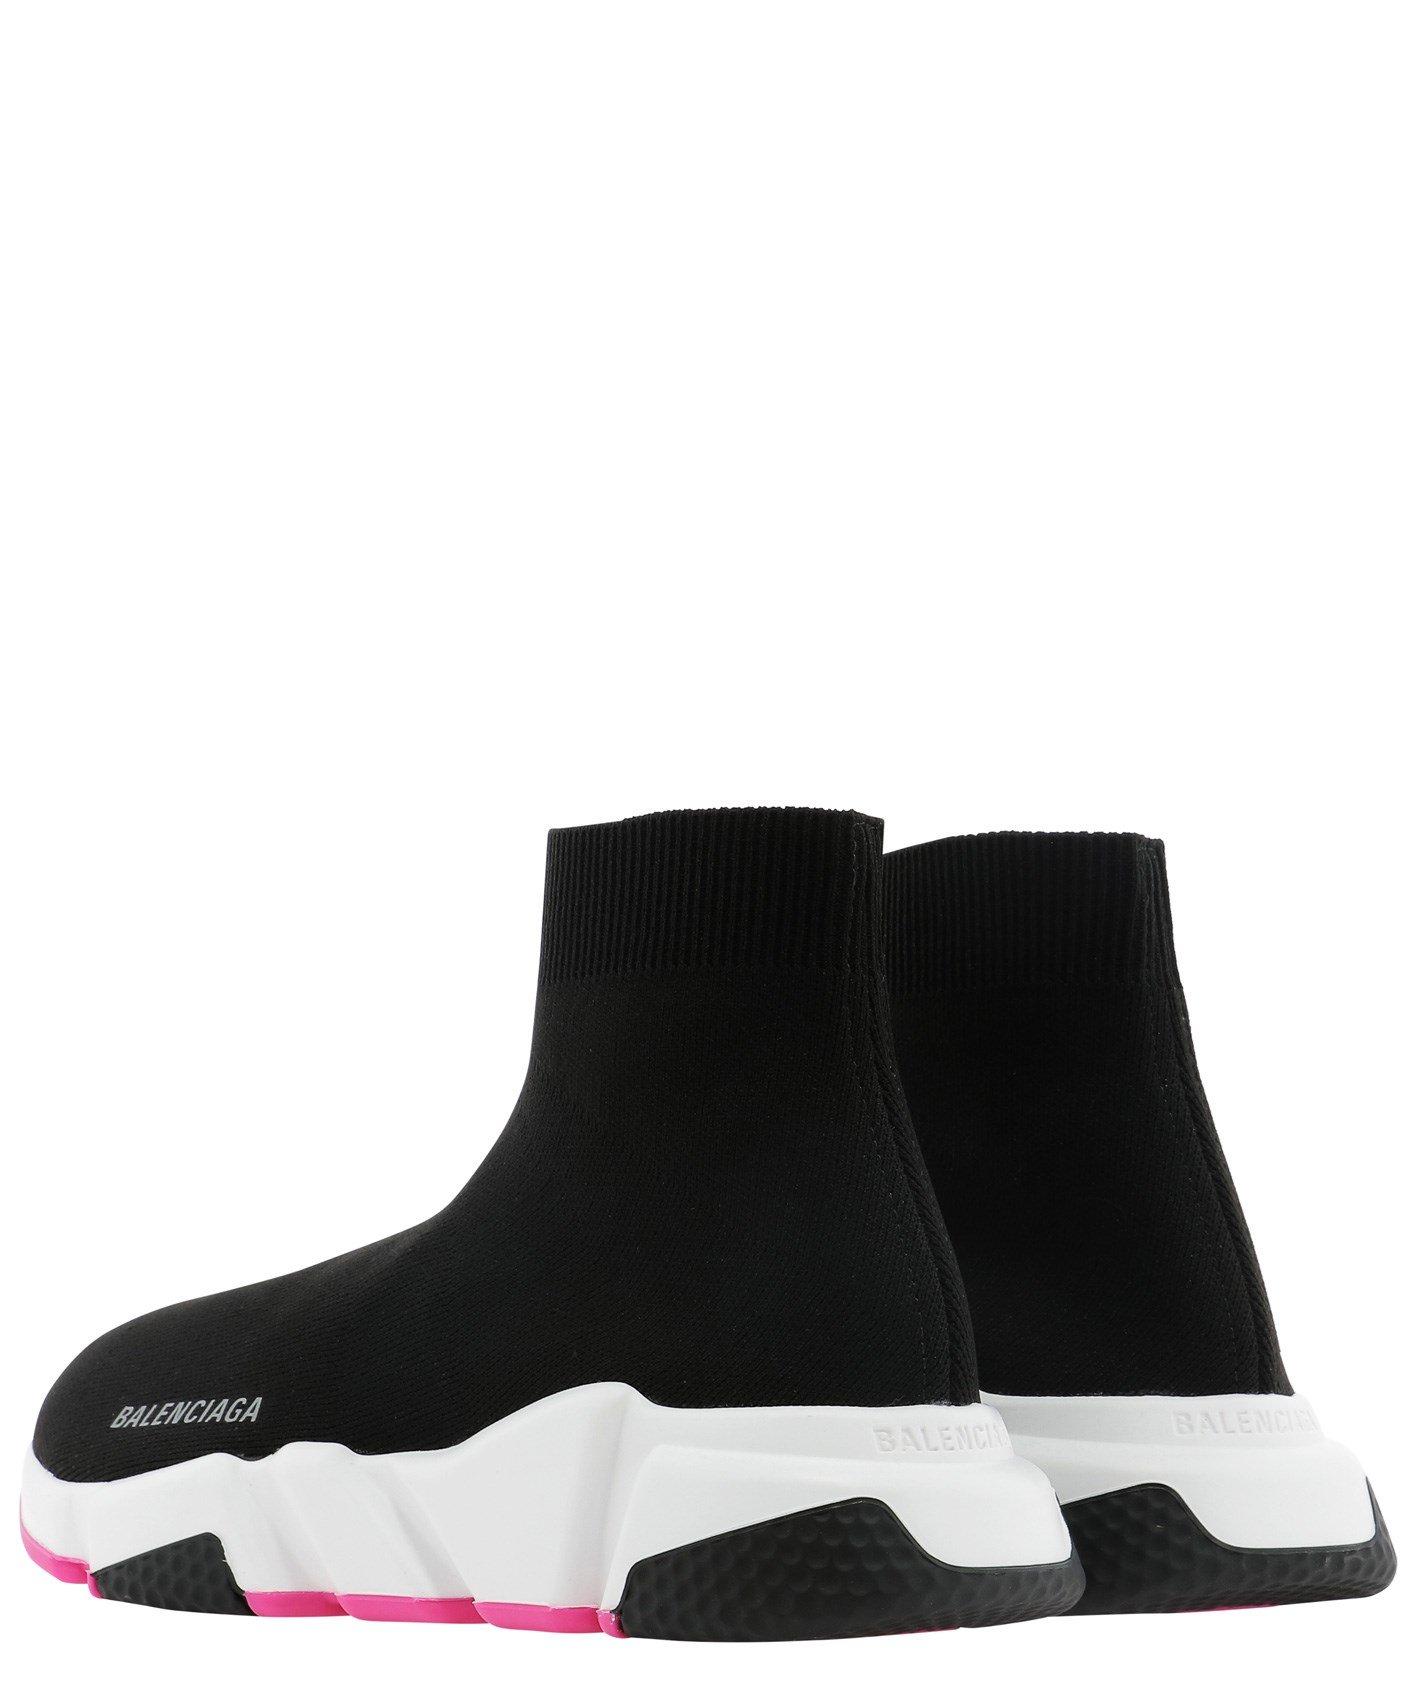 Balenciaga Synthetic Speed Fluo Pink Trainers in bk/w/p (Black) - Lyst